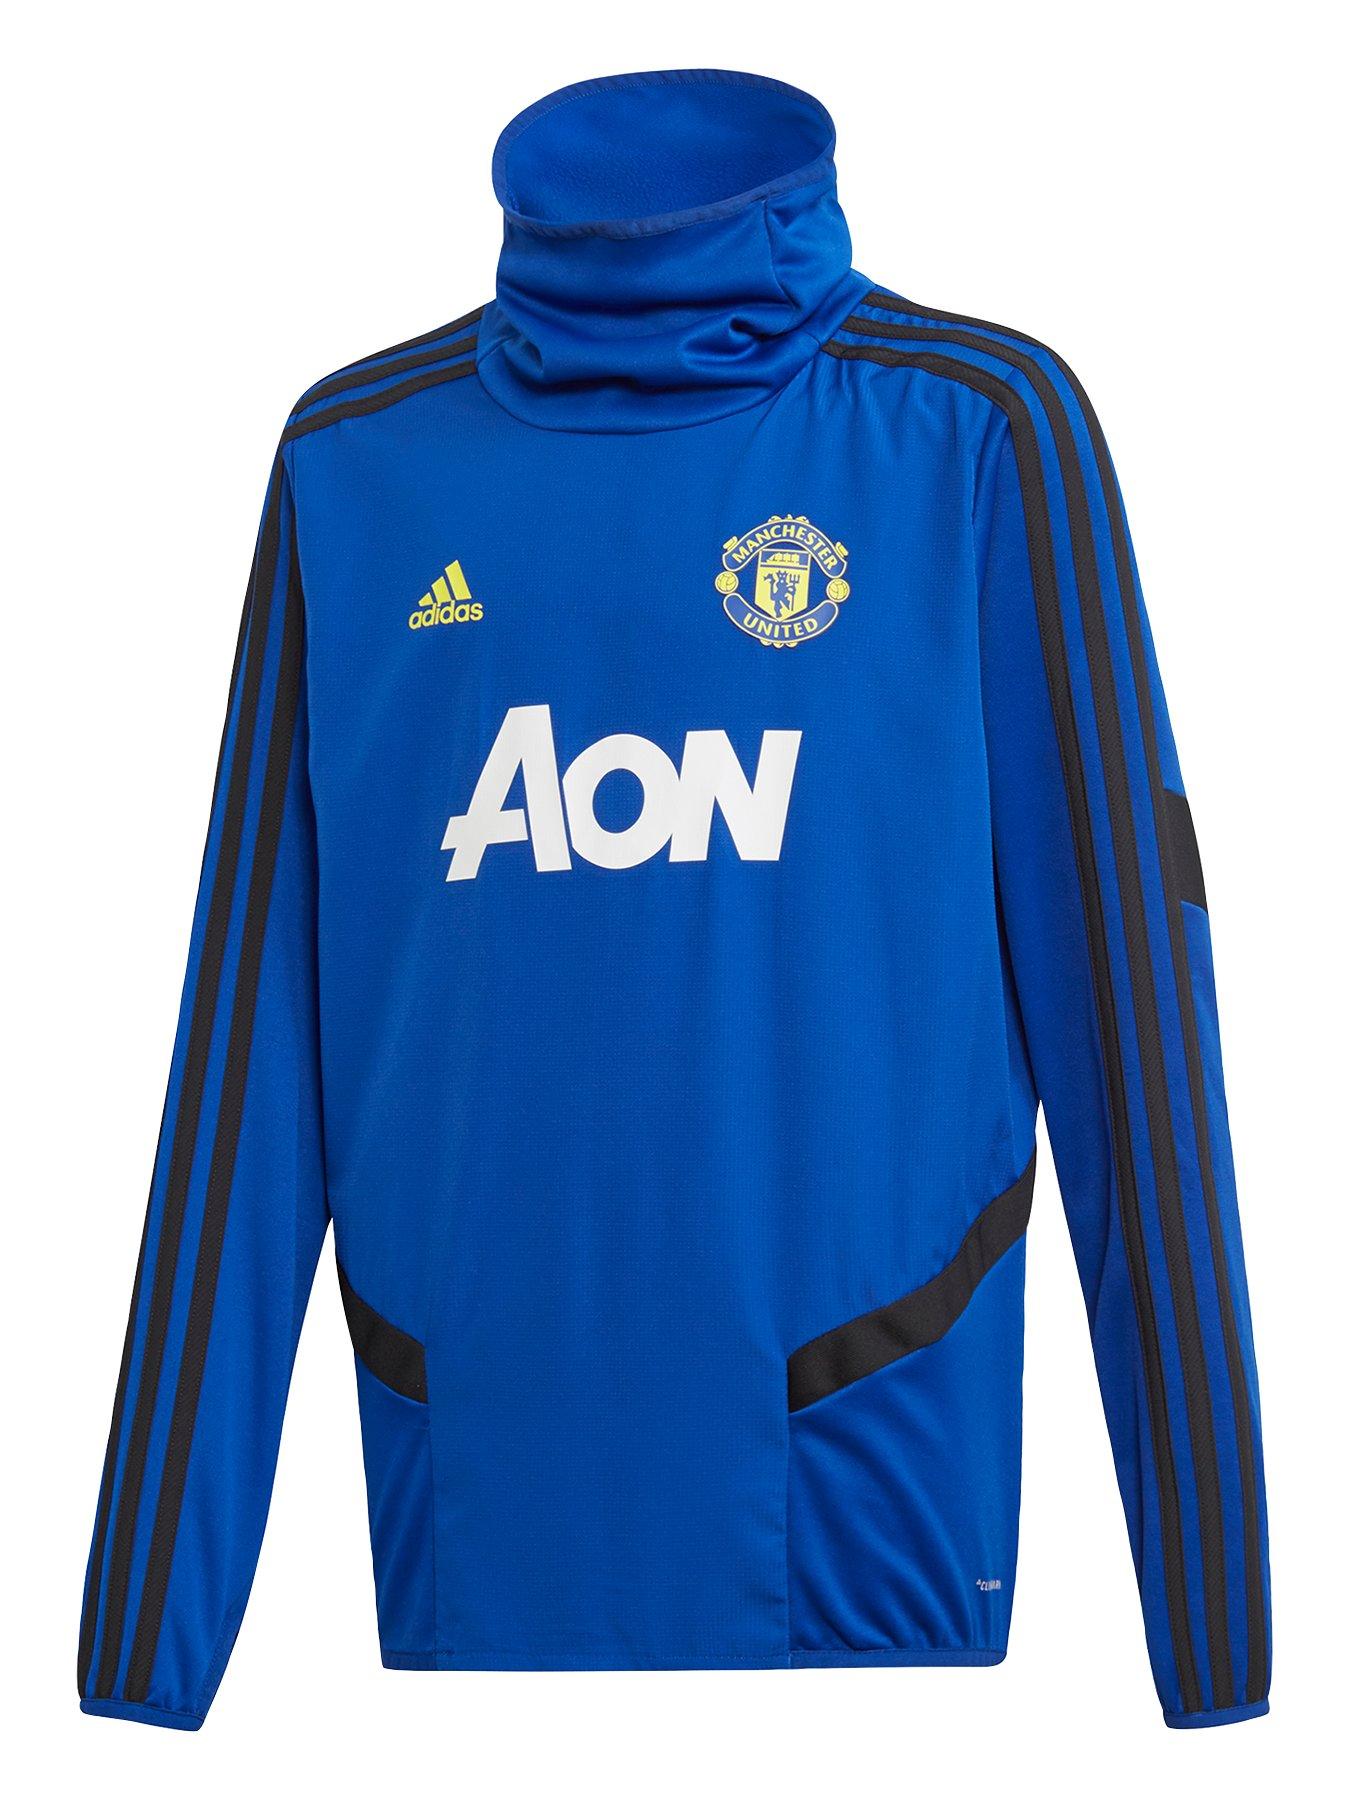 manchester united warm up jersey